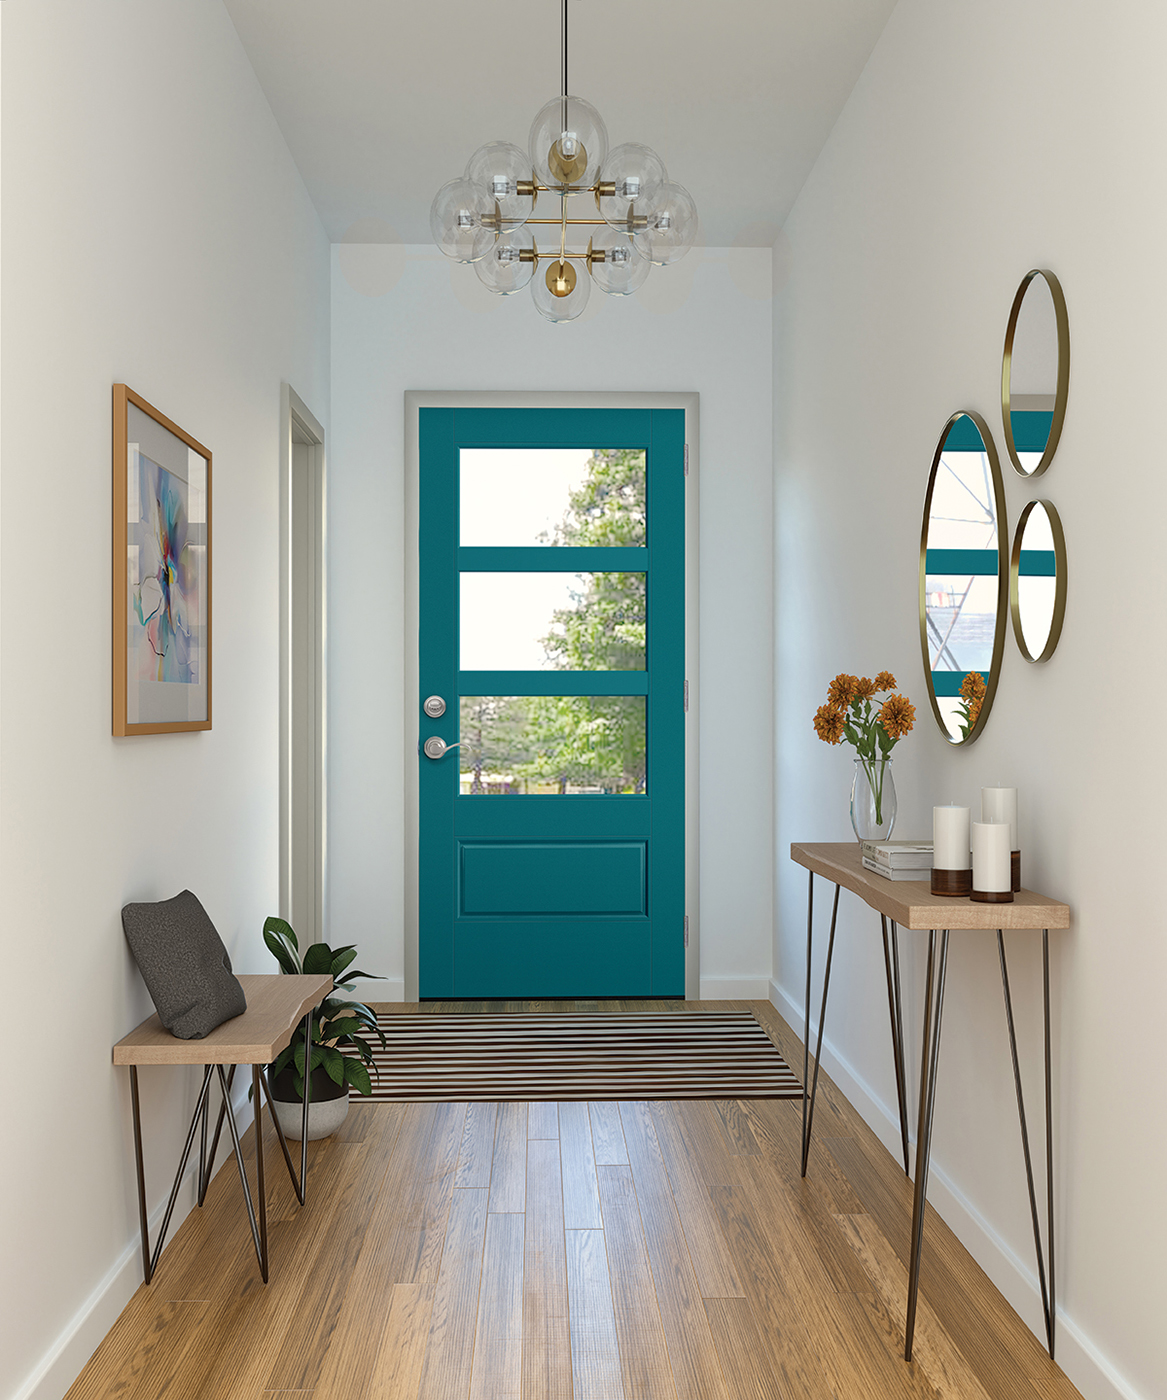 Front view of a hallway with white walls, decorative hanging lights, circular mirrors, two tables, a painting, and a striped black and white doormat leading to a teal 3/4-lite single panel door with glass inserts.